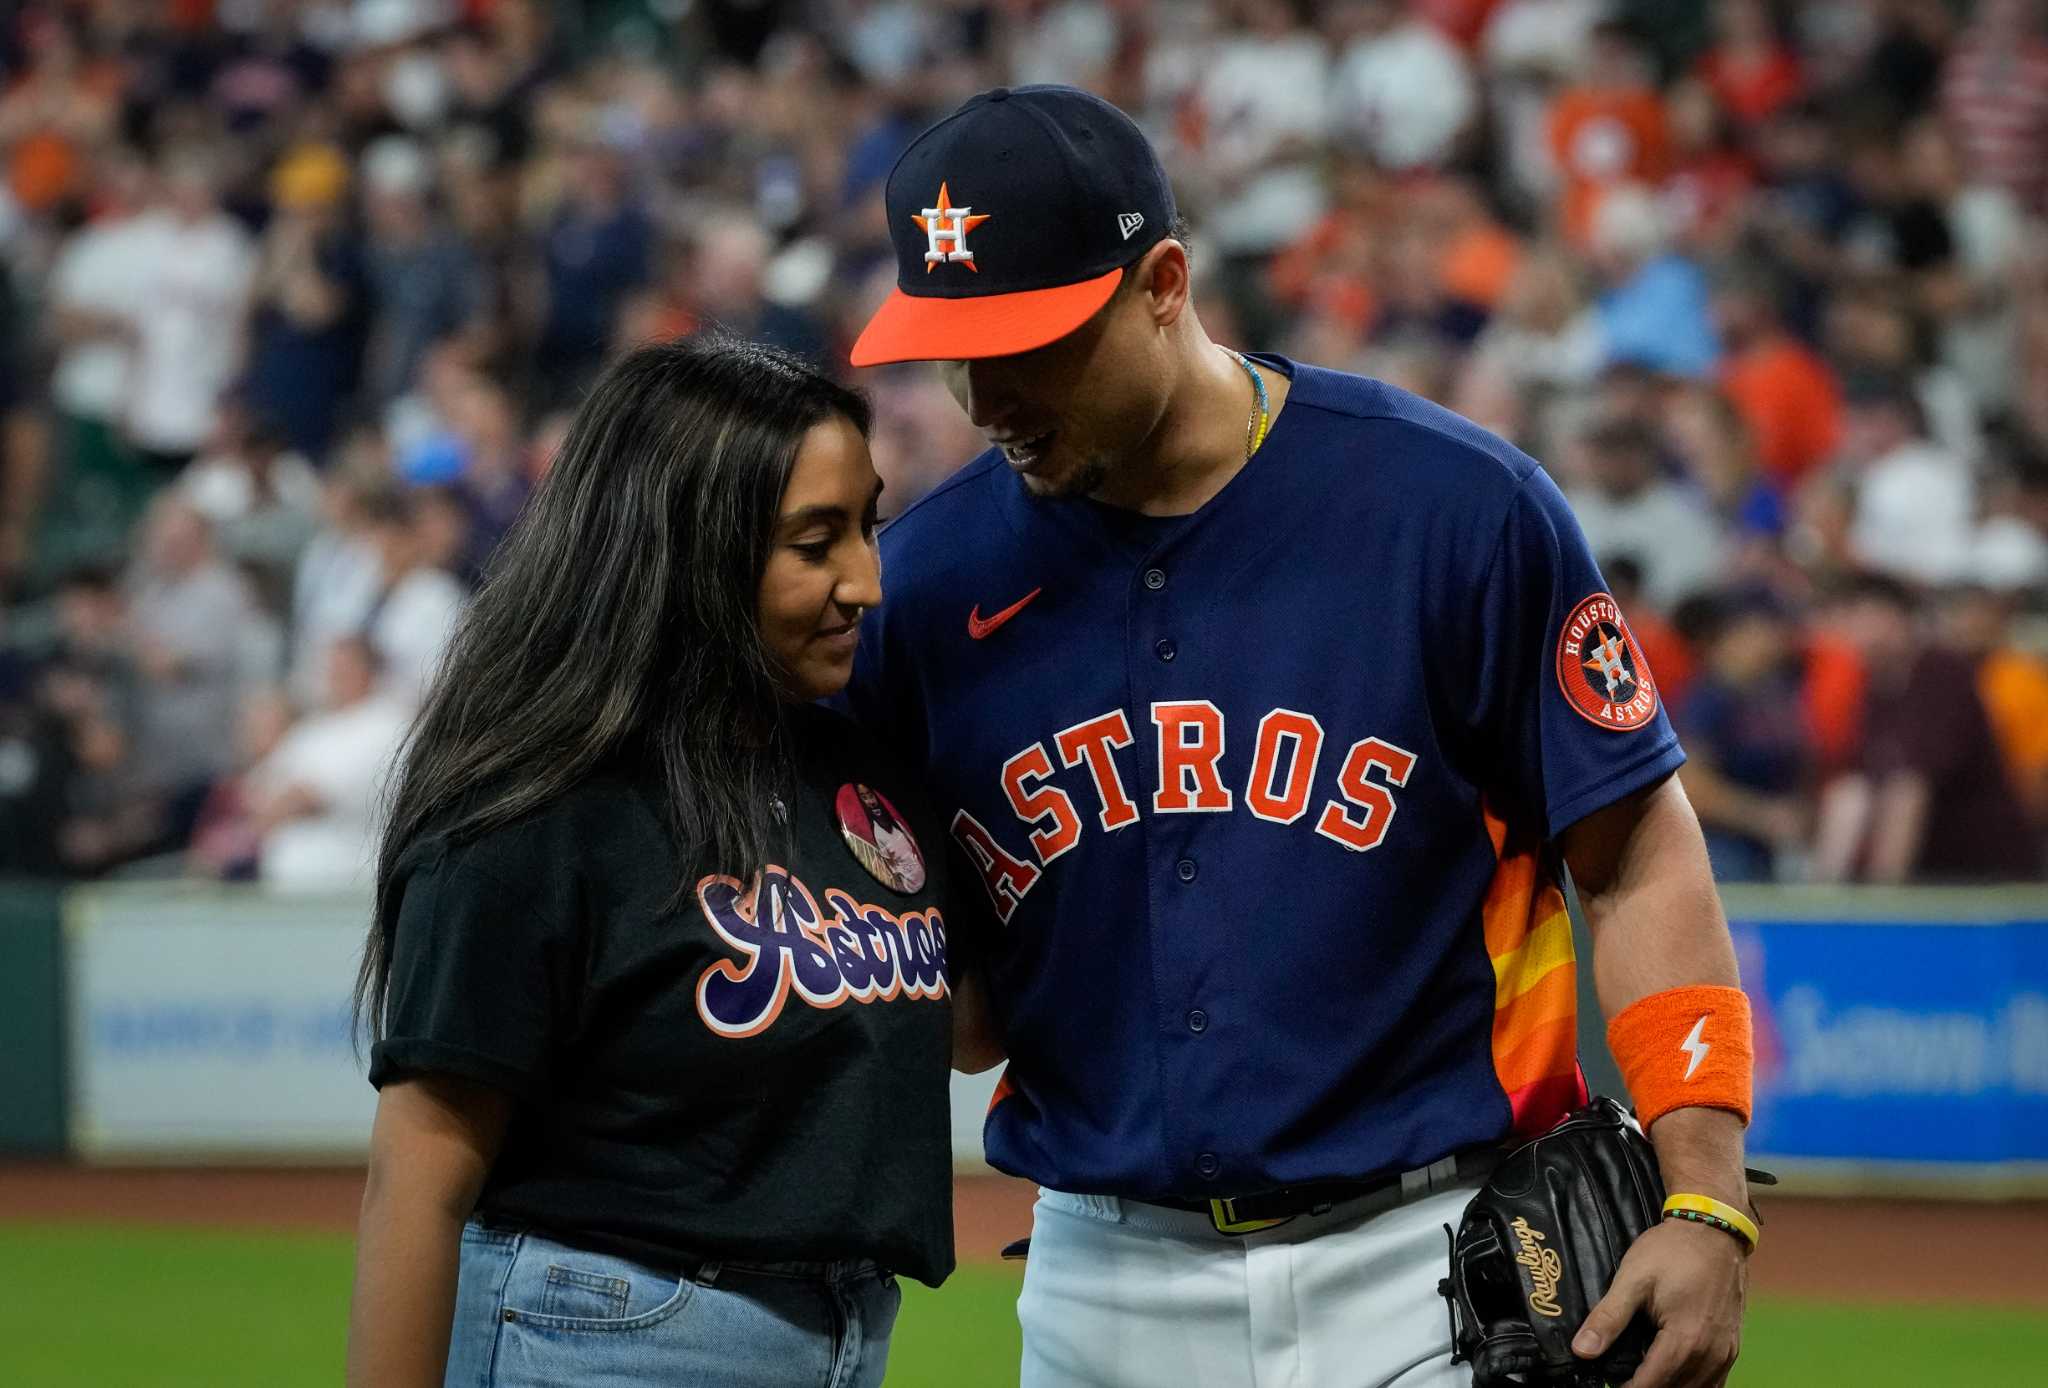 Uvalde victim's sister throws first pitch at Astros game